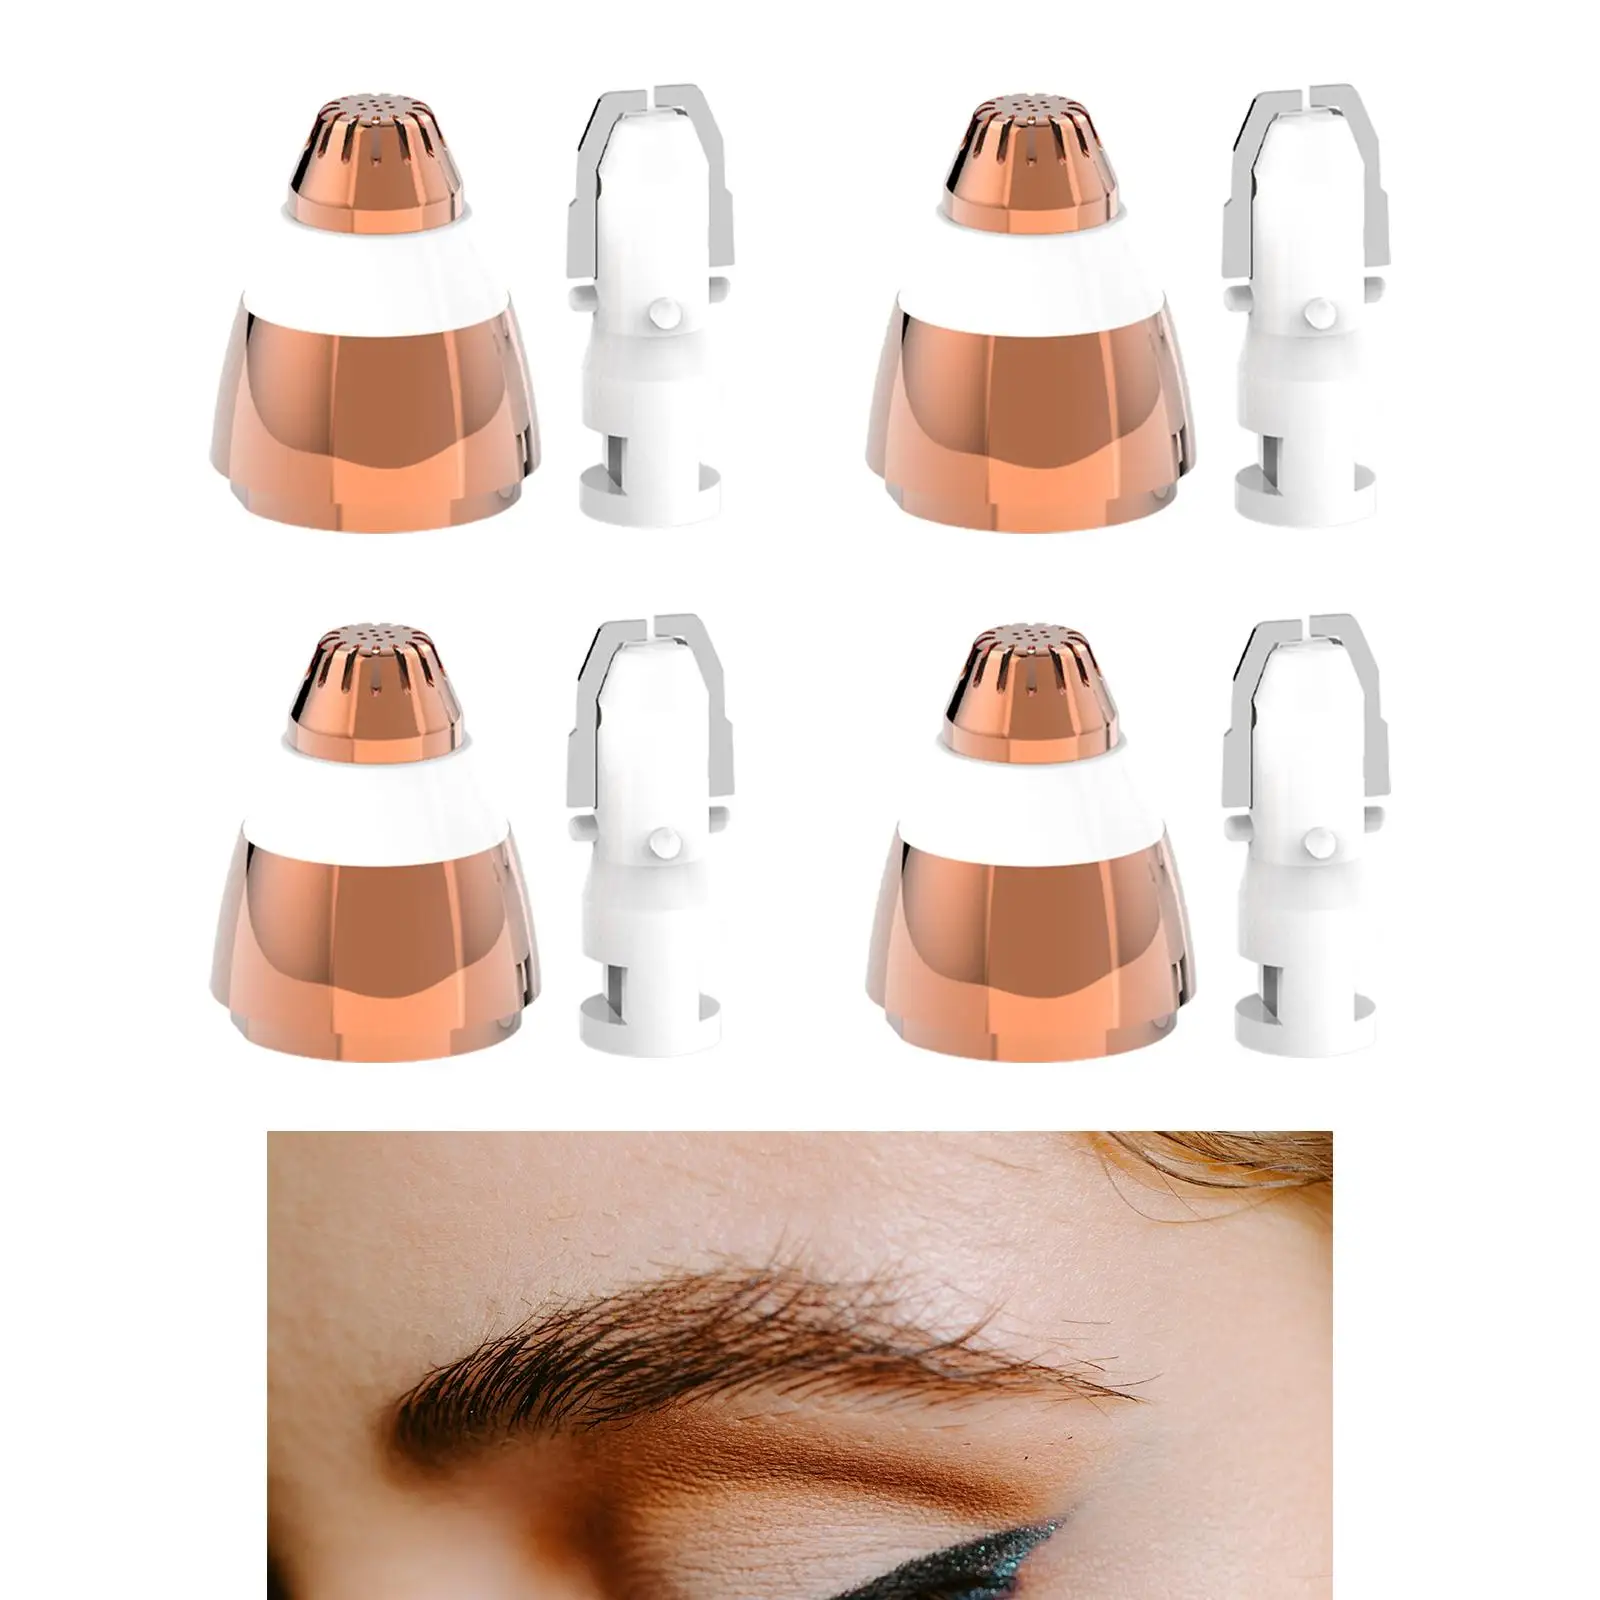 4 Sets Eyebrow Hair Remover Replacement Heads Eyebrow Facial Hair Removal Tool Facial Hair Remover Women Shaving Repair Part